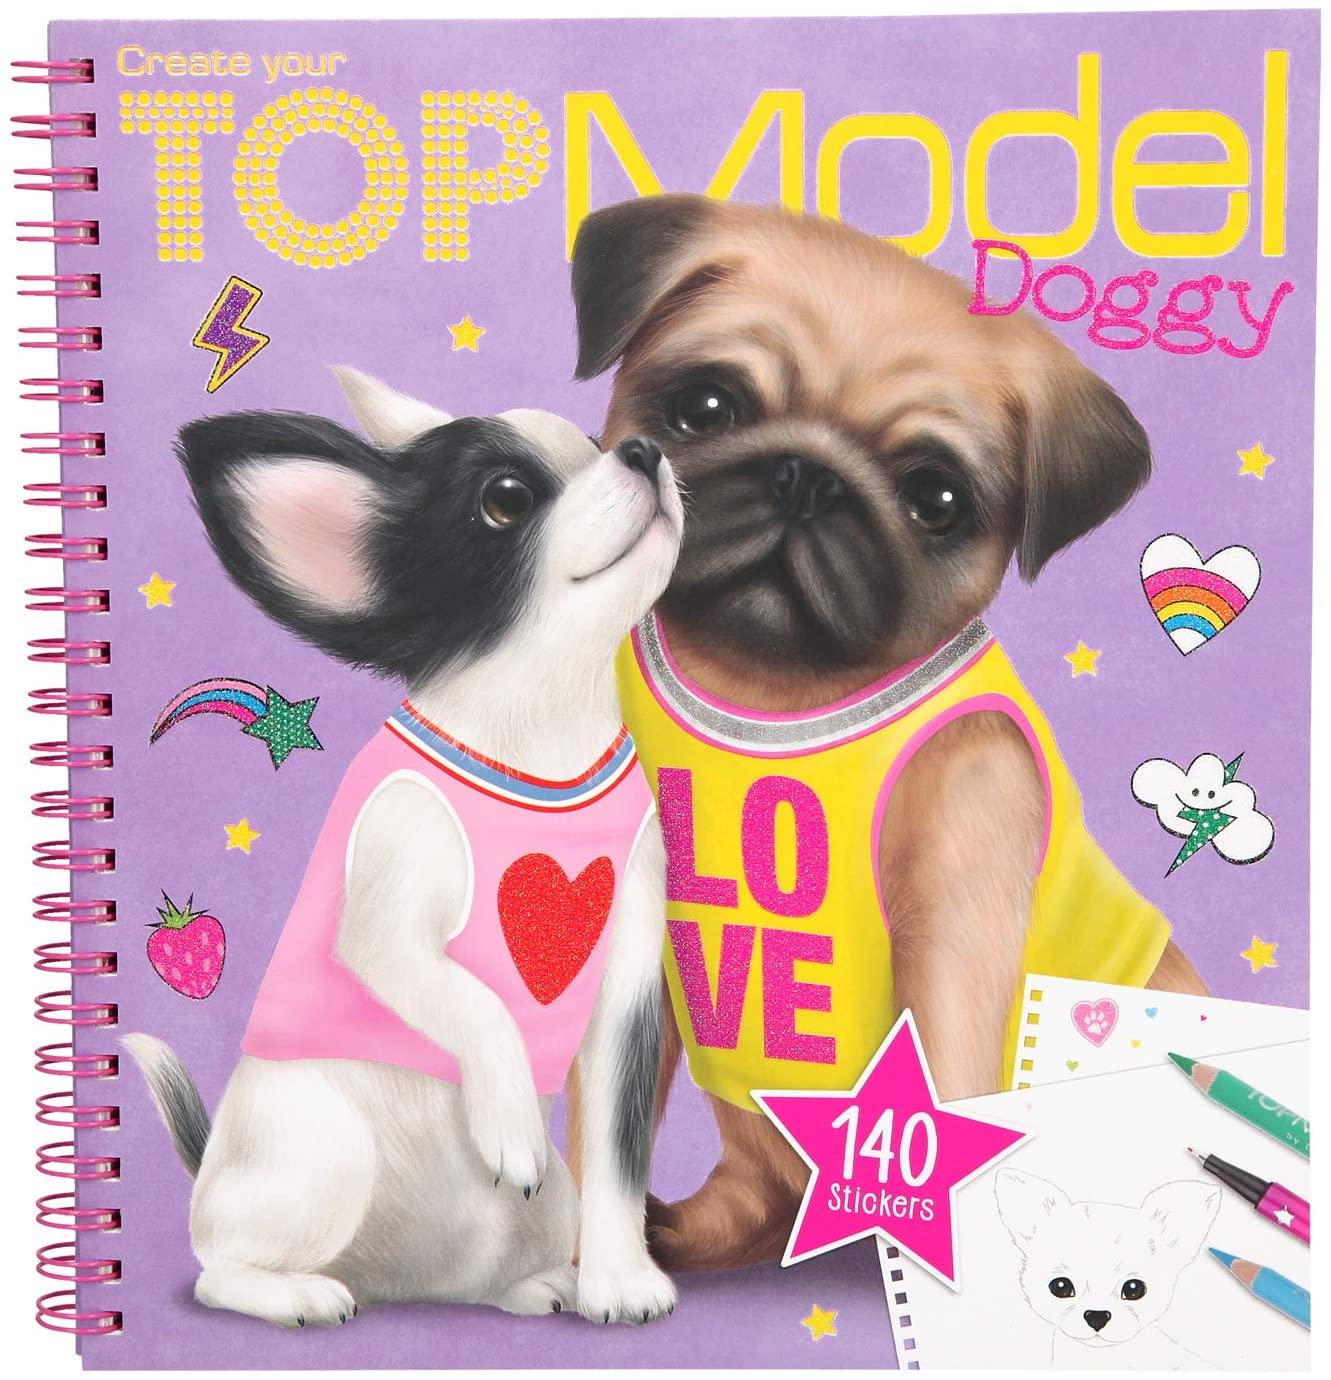 Top Model Create Your TOPModel Doggy Colouring Book